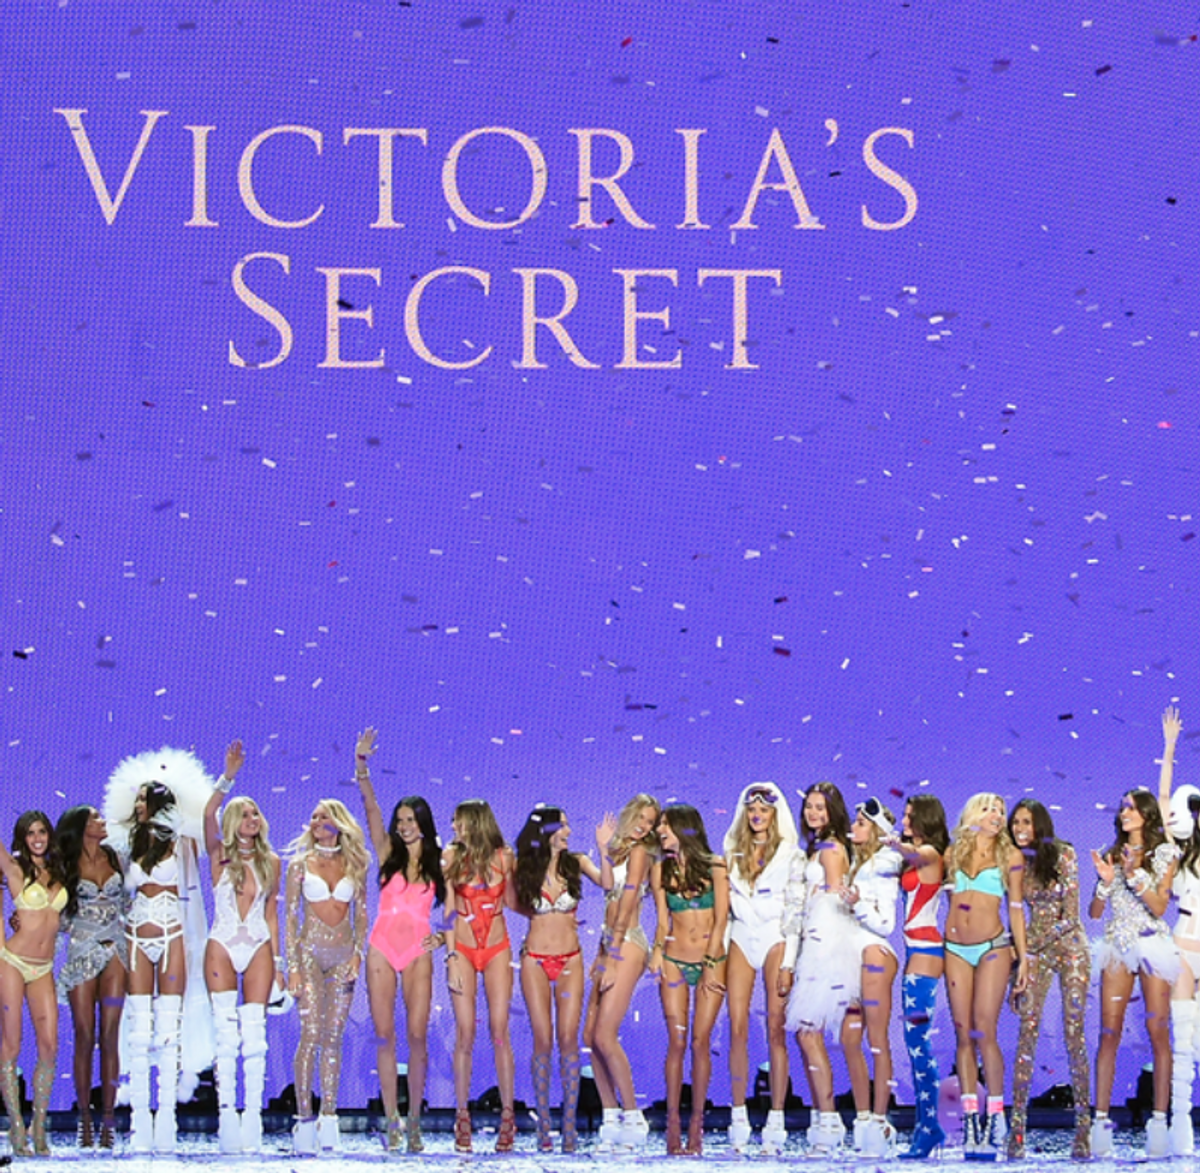 10 Thoughts You Have During The Victoria's Secret Fashion Show